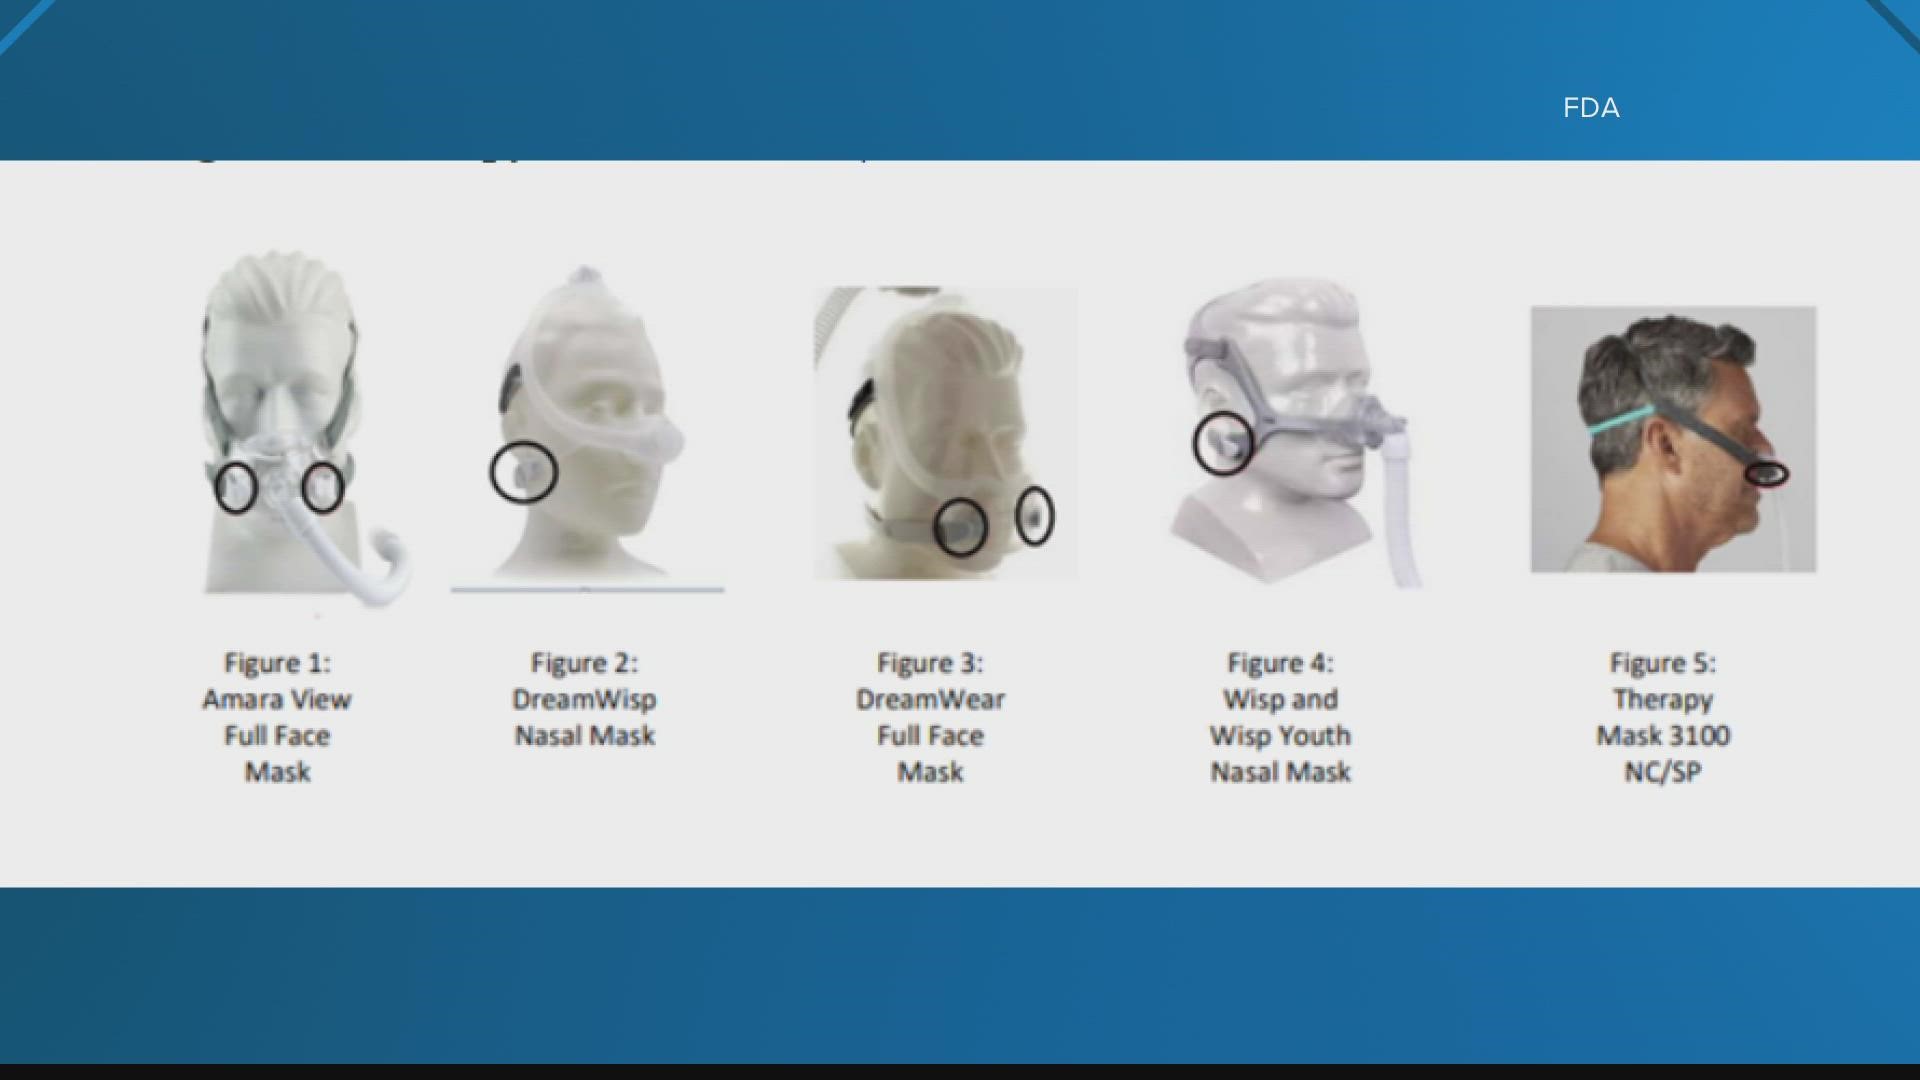 The FDA says more than 17 million masks are impacted by this recall.